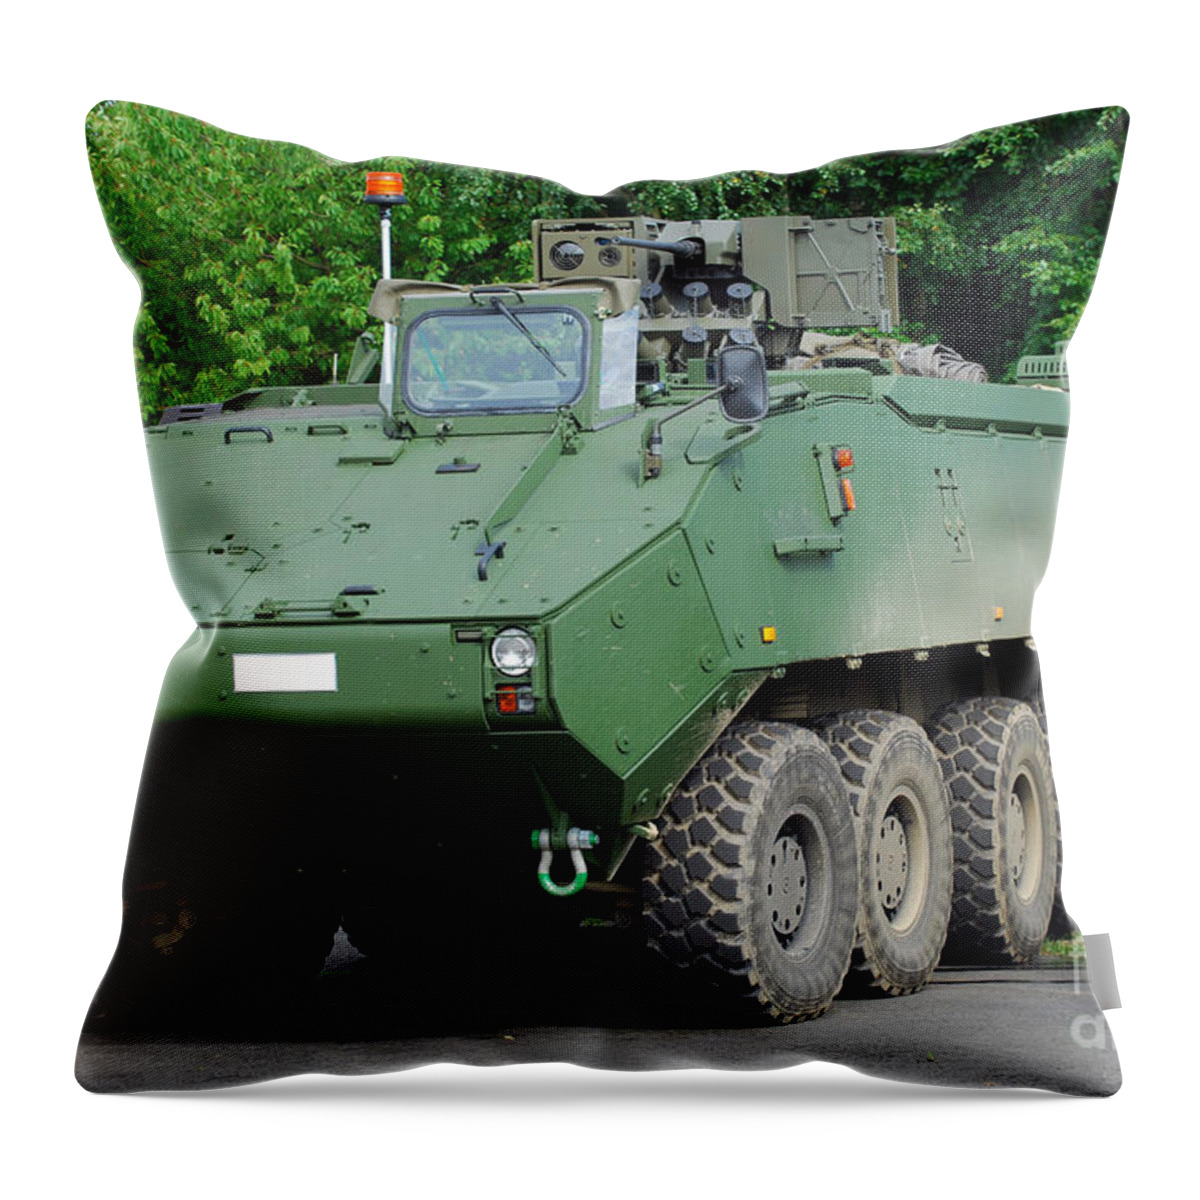 Armament Throw Pillow featuring the photograph The Piranha IIic Of The Belgian Army #1 by Luc De Jaeger